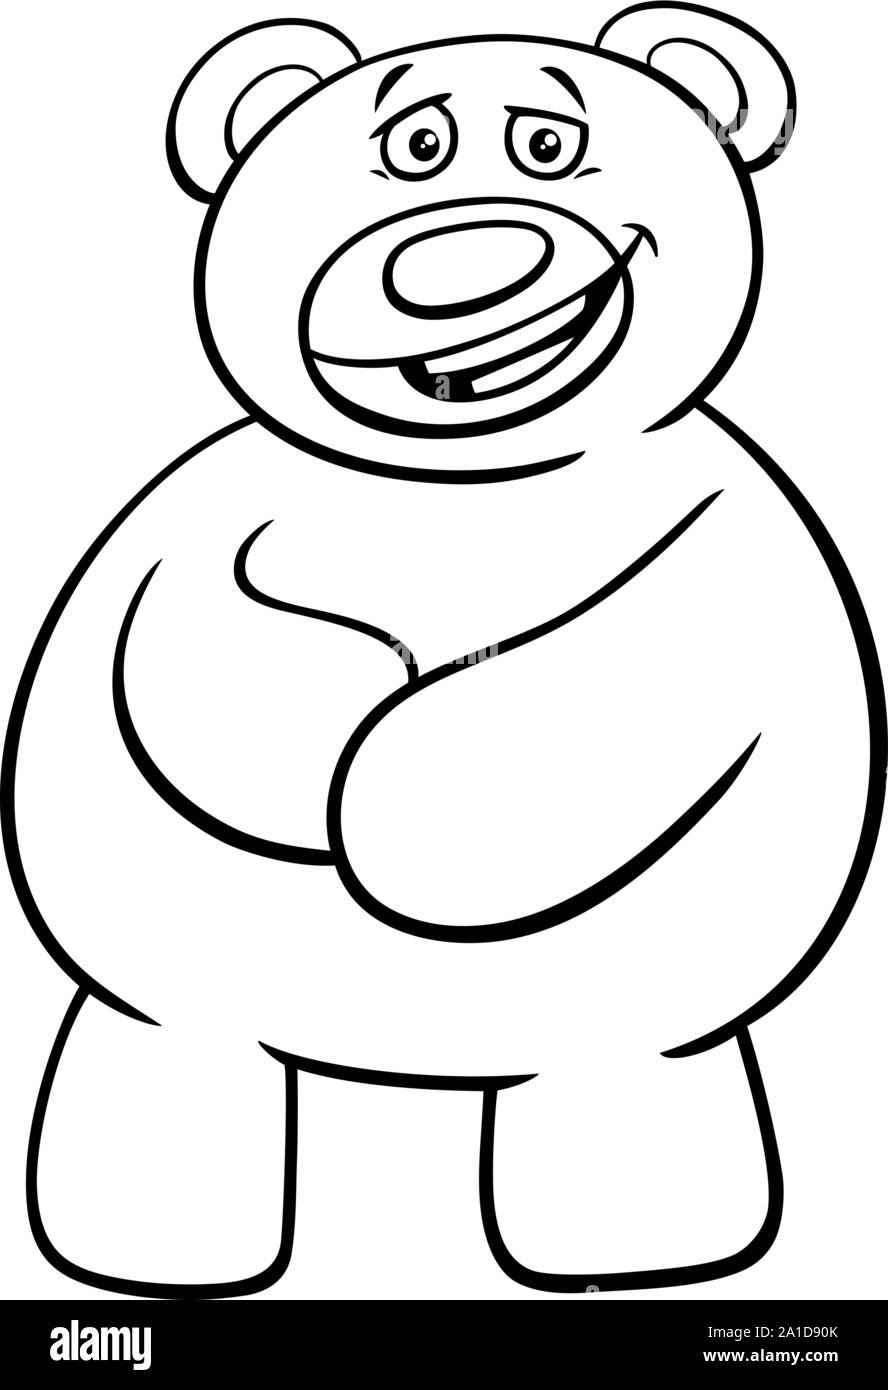 Black and White Cartoon Illustration of Teddy Bear Toy Comic Character Coloring Book Stock Vector